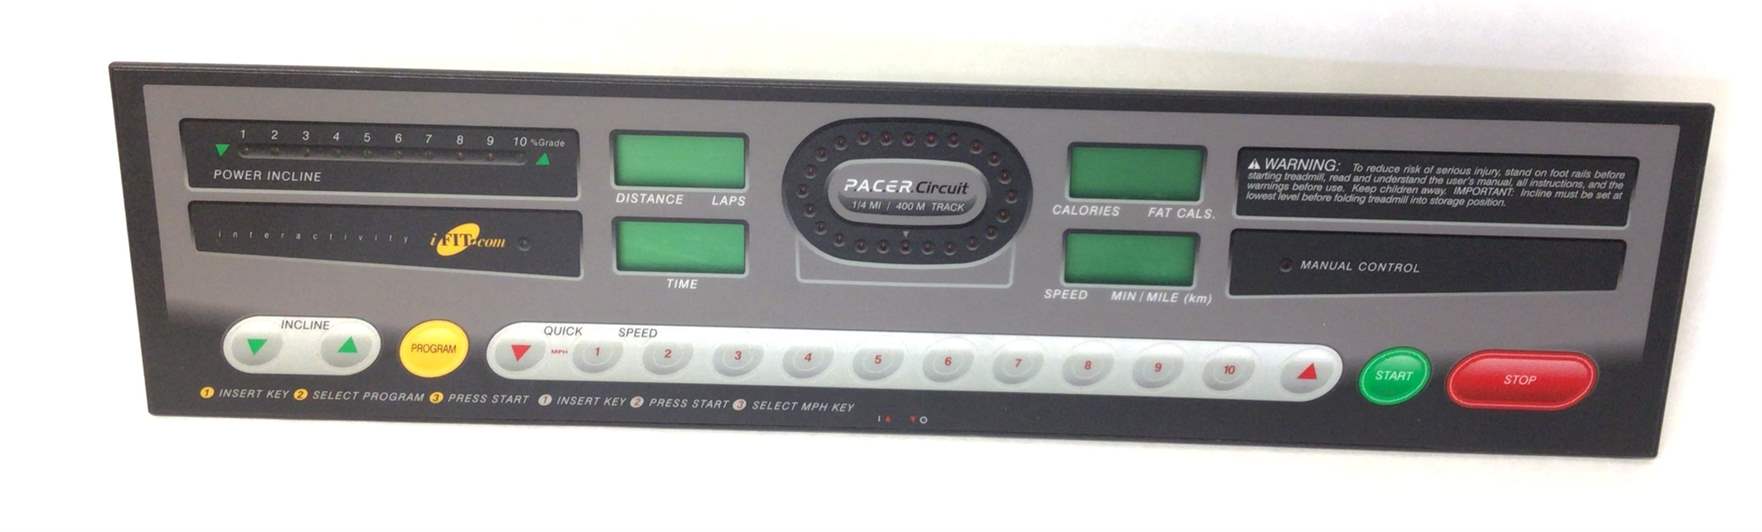 ET-29945 Display Console (Used)